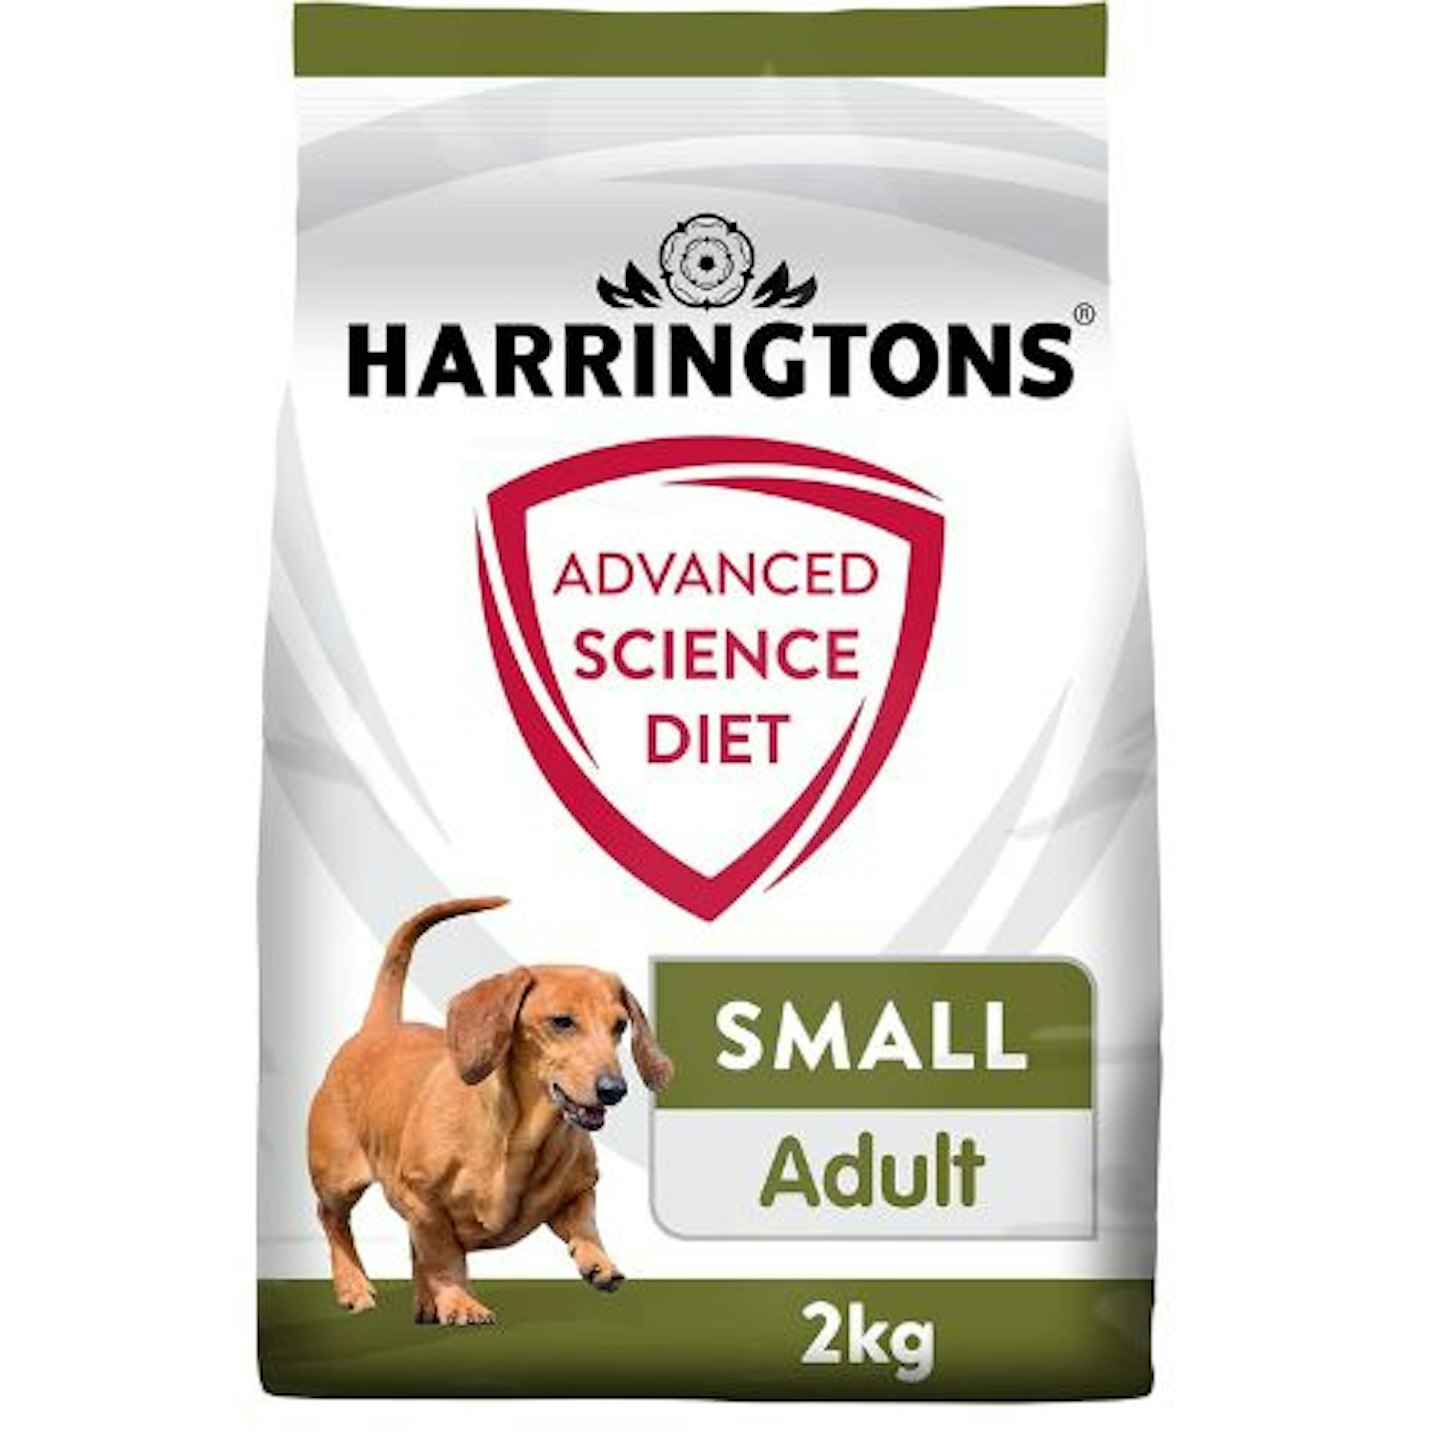 Harringtons Advanced Science Diet Complete Small Breed Adult Dry Dog Food